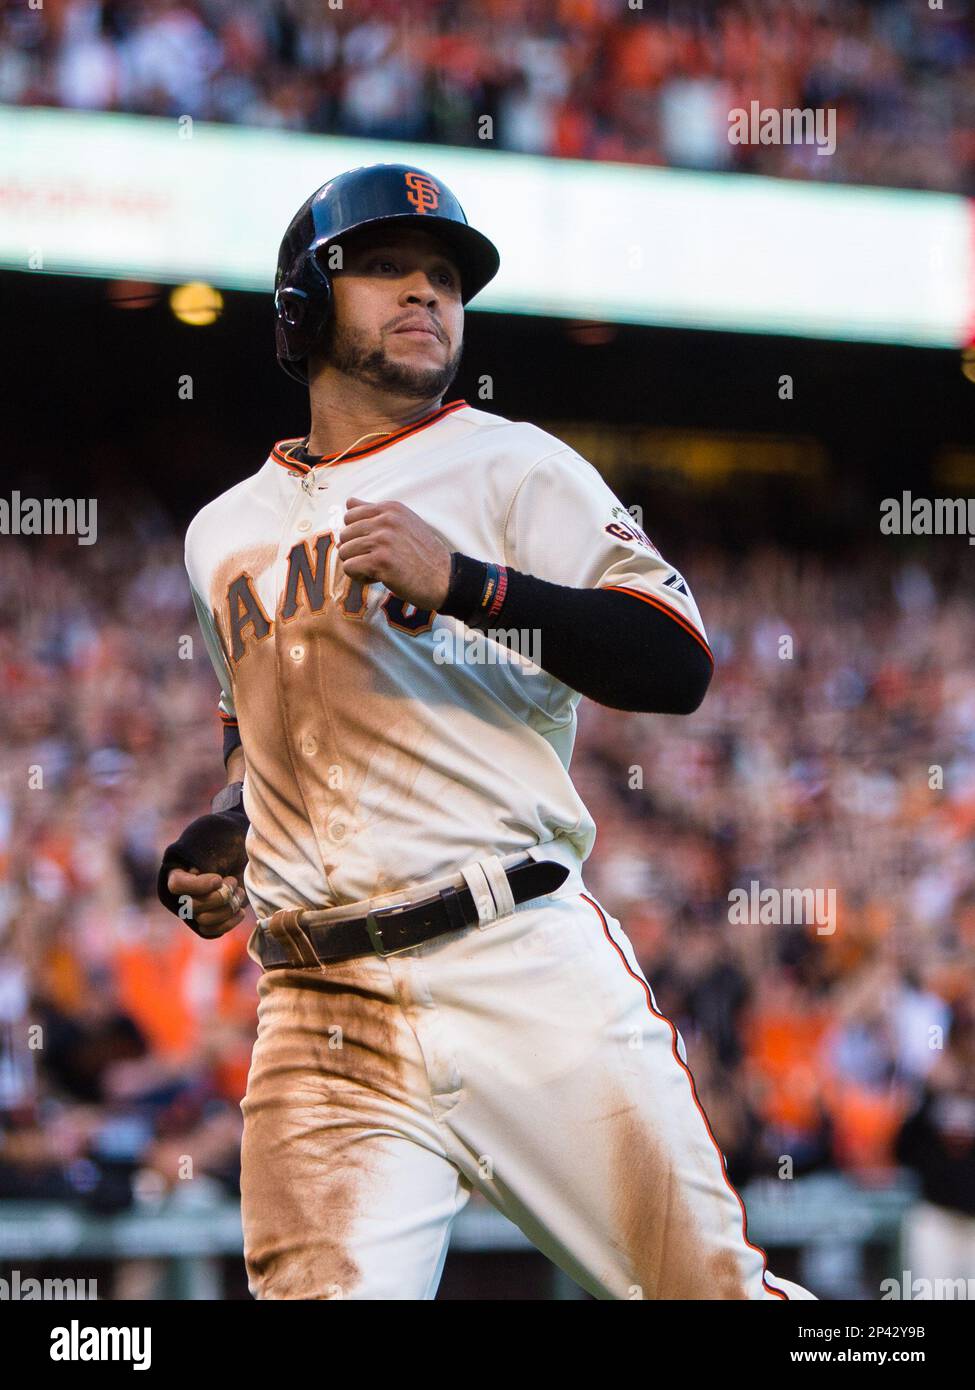 October 25, 2014: San Francisco Giants center fielder Gregor Blanco (7)  scores off a ground out to fielder's choice by Pence, in the first inning  during game 4 of the World Series